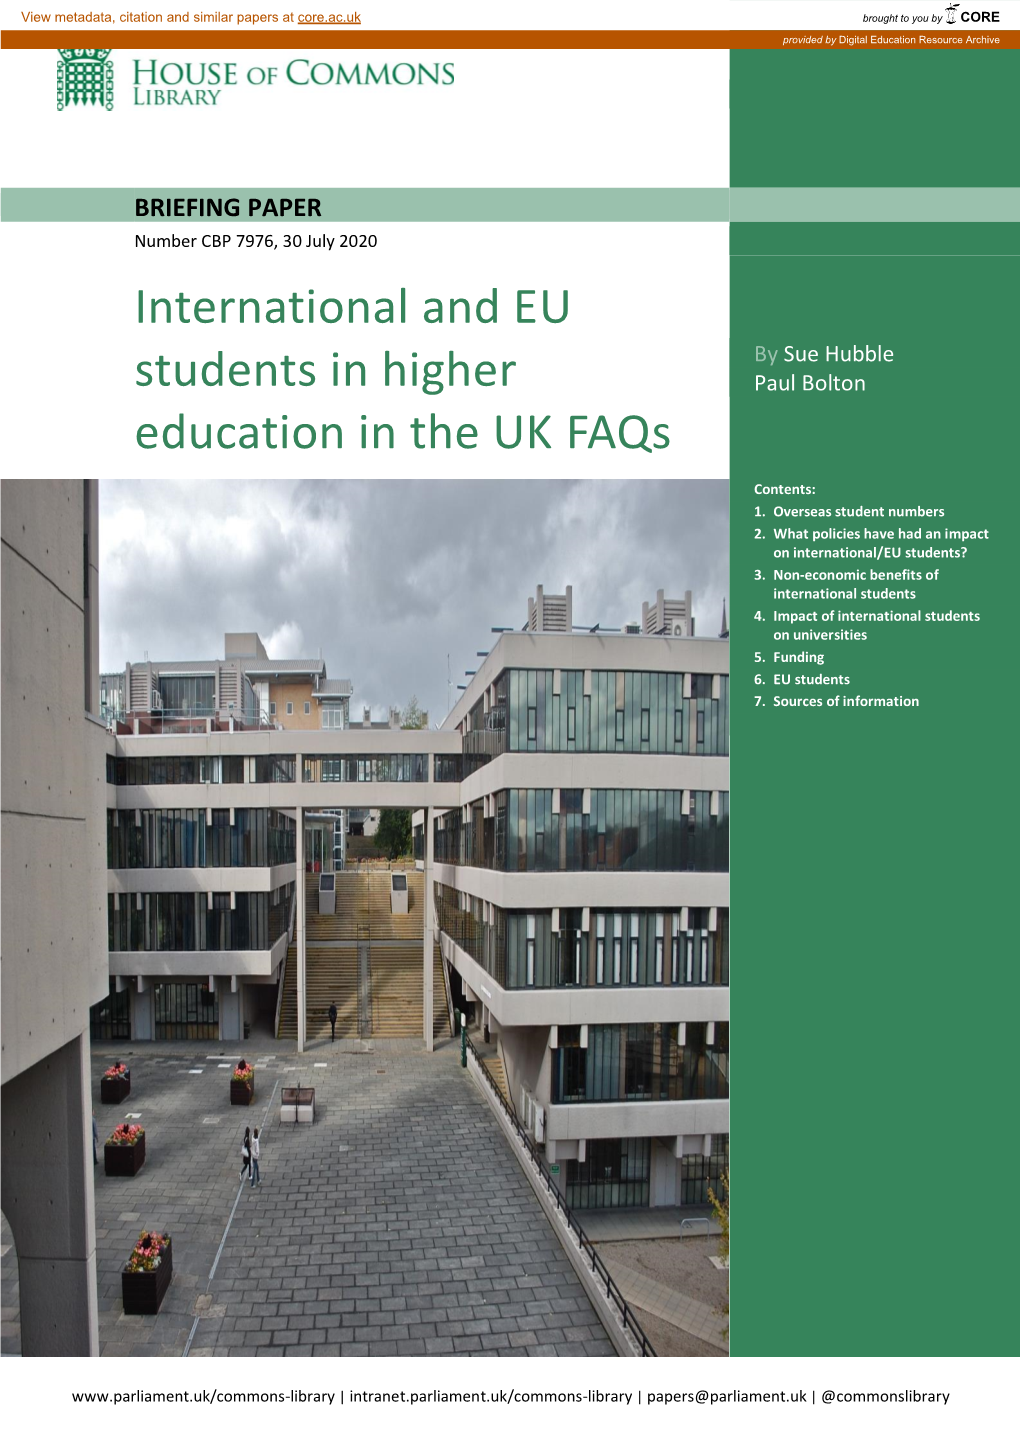 International and EU Students in Higher Education in the UK Faqs